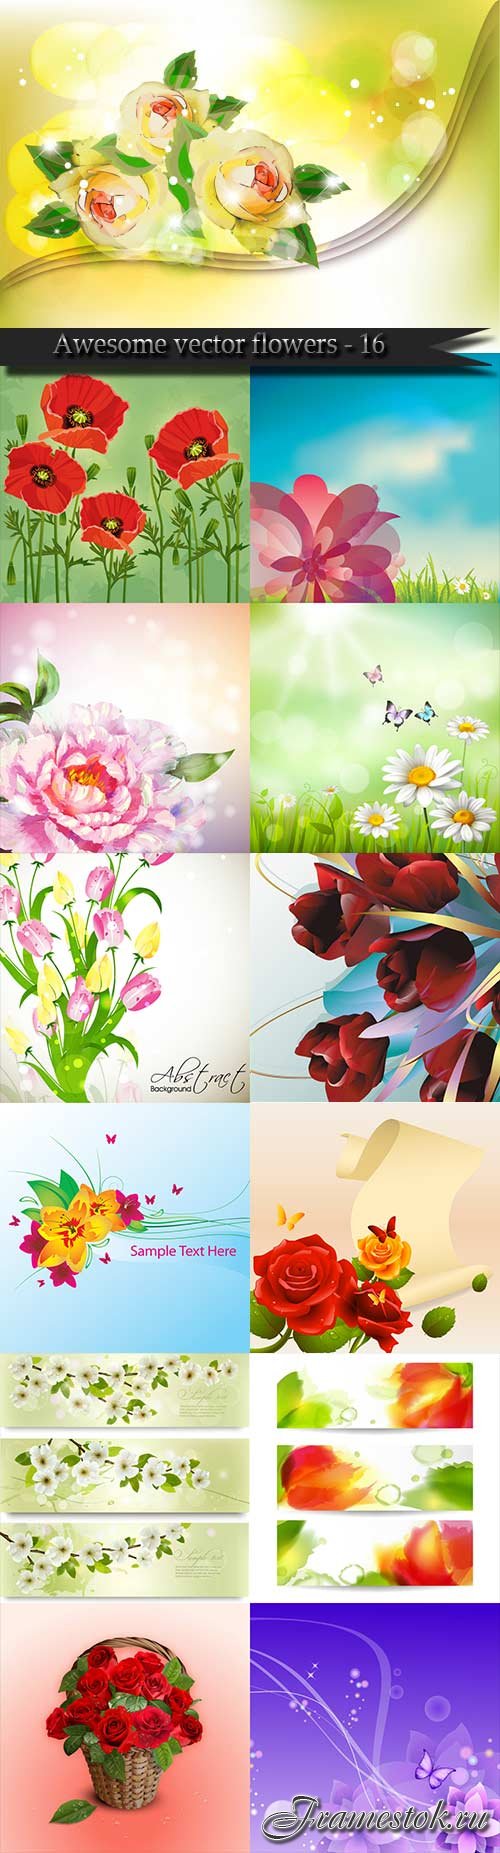 Awesome vector flowers - 16